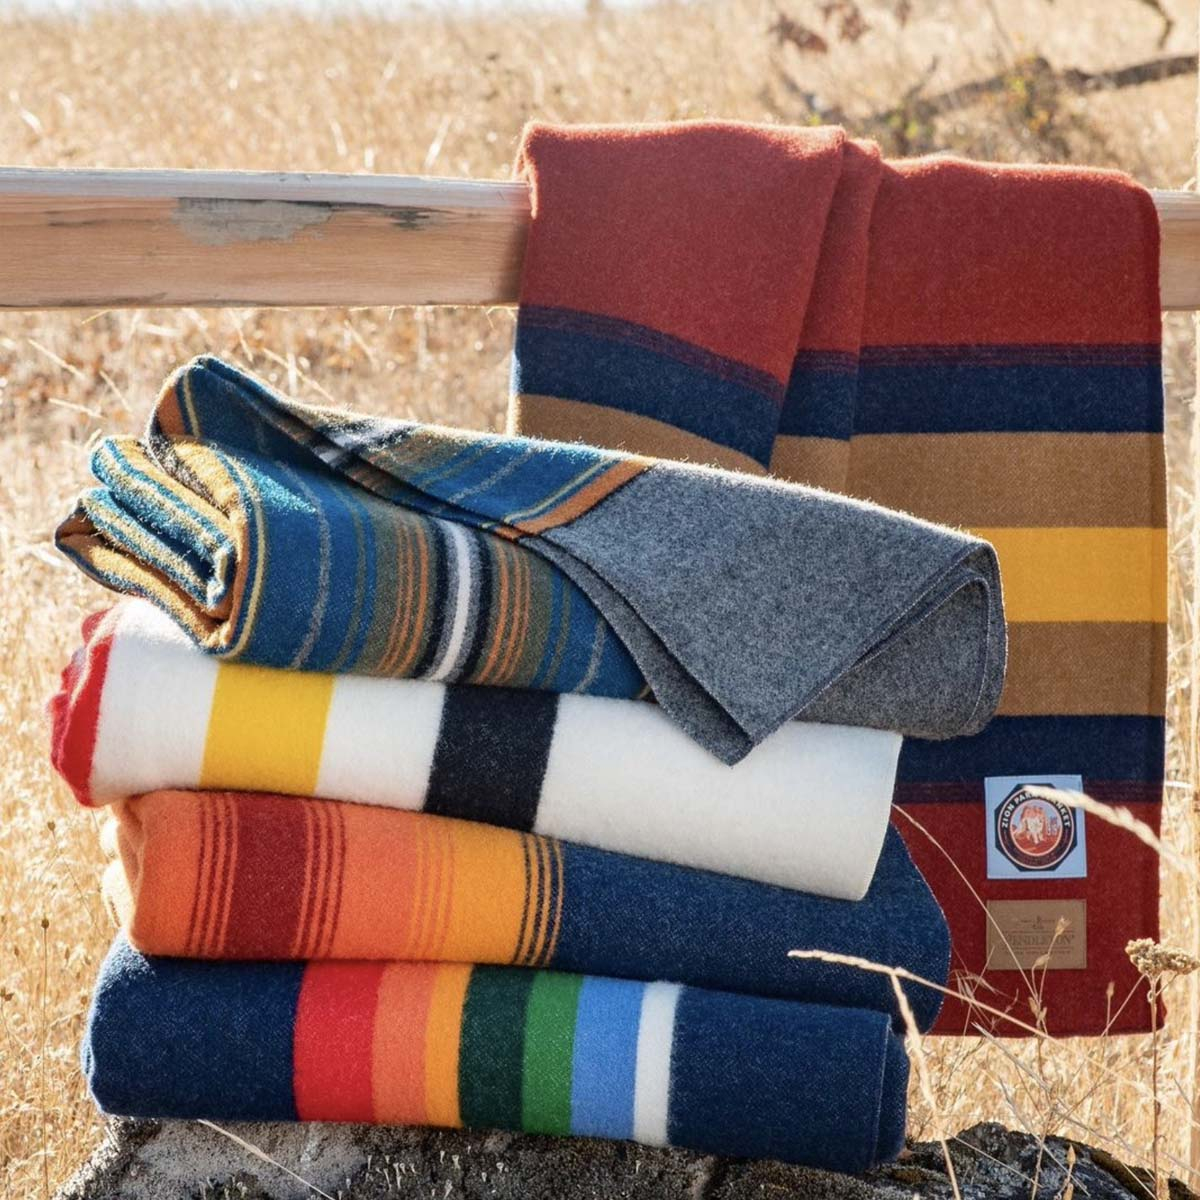 Pendleton National Park Throw Collection, blankets perfect for picnics, camping or curling up indoors